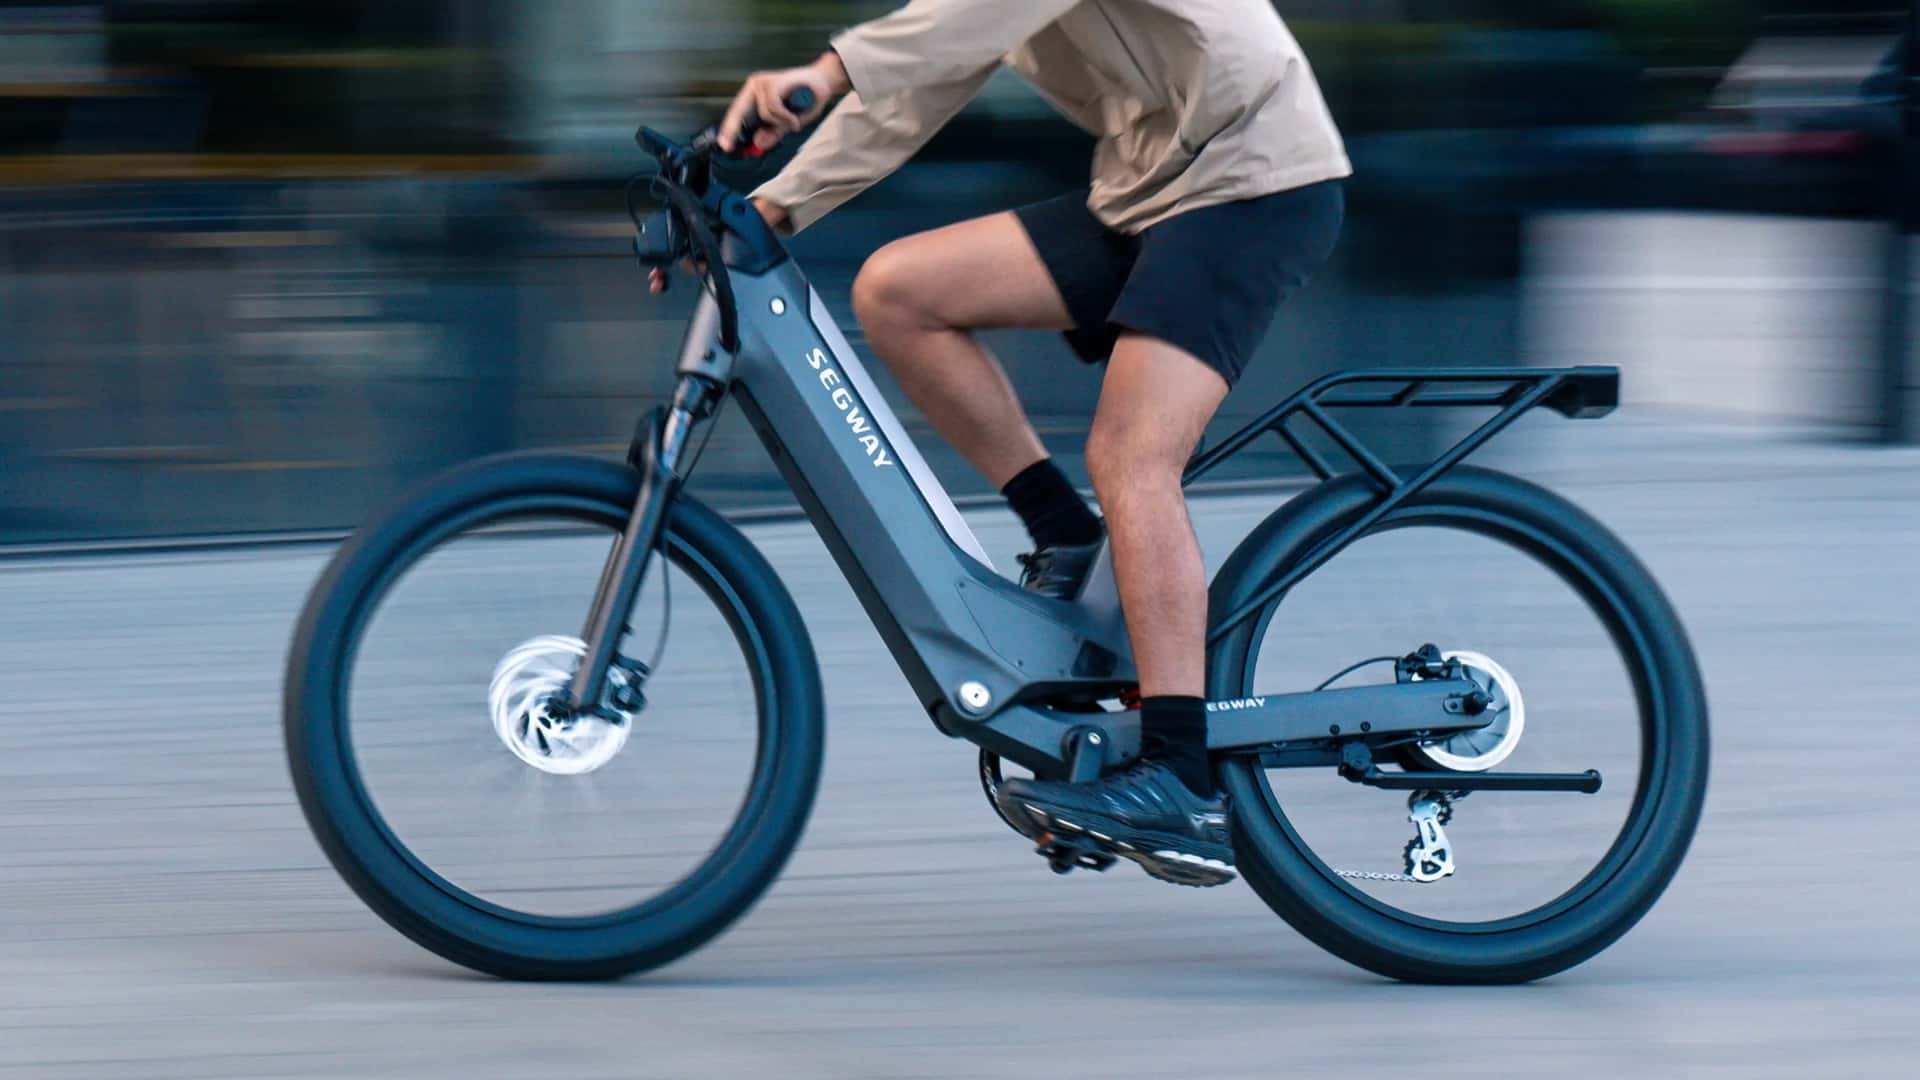 segway-ninebot-just-unveiled-two-powerful-e-bikes-called-xafari-and-xyber%20(1)